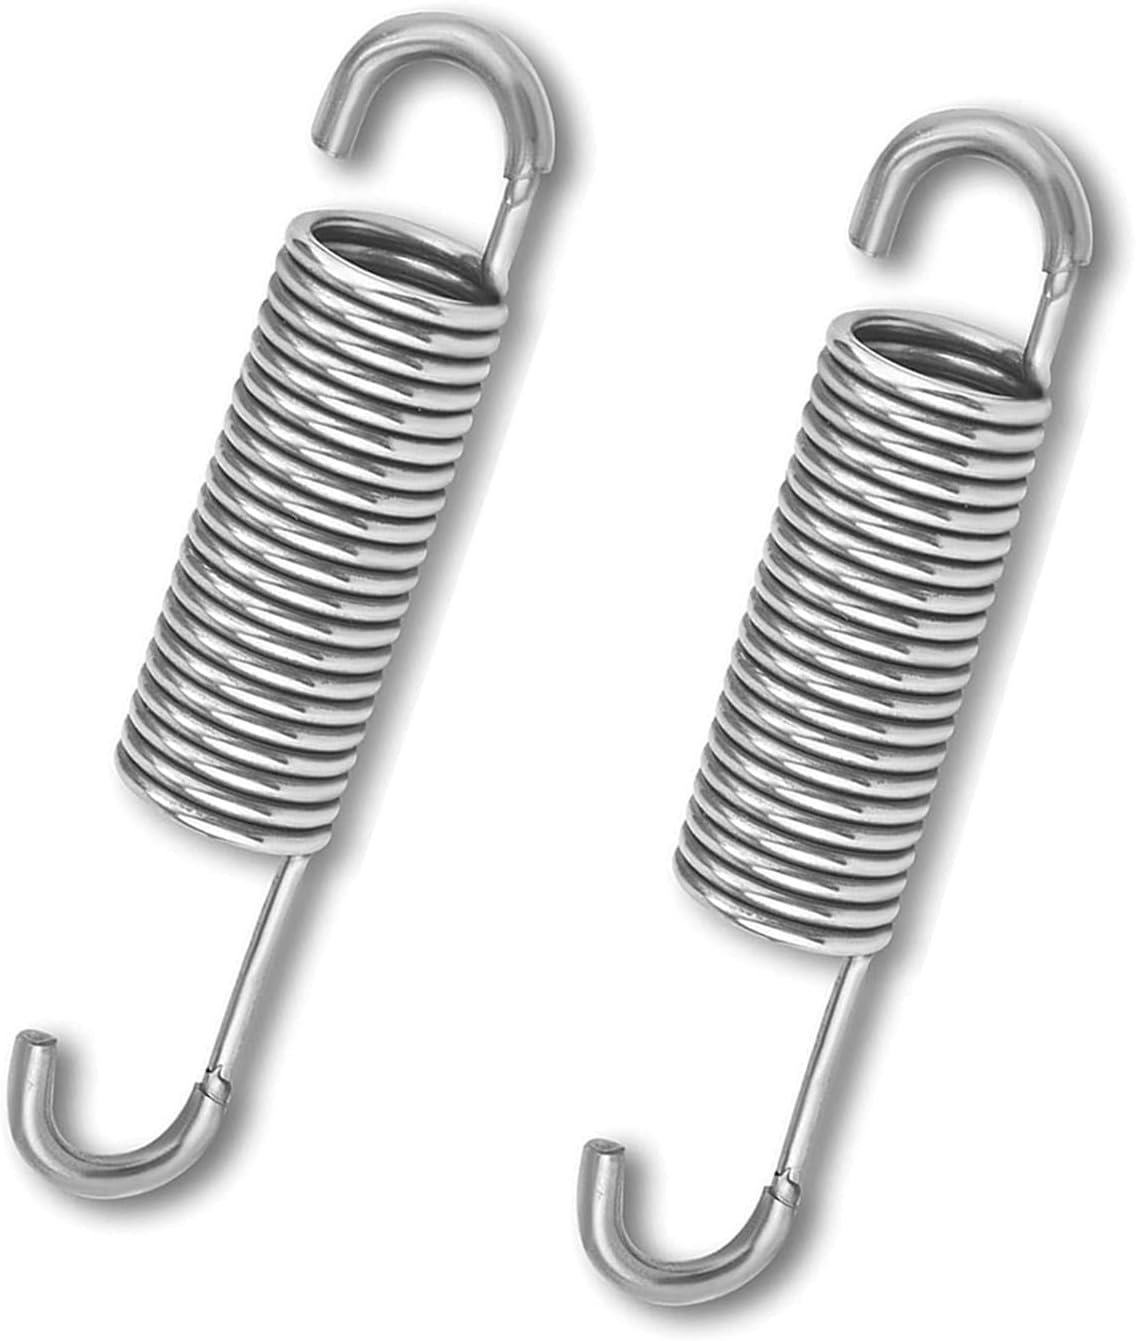 WAO ZONE 2PCS 3-5/8 Stainless Steel Replacement Recliner Sofa Mechanism Recliner Springs - Long Neck Hook Style-Recliner Replacement Parts